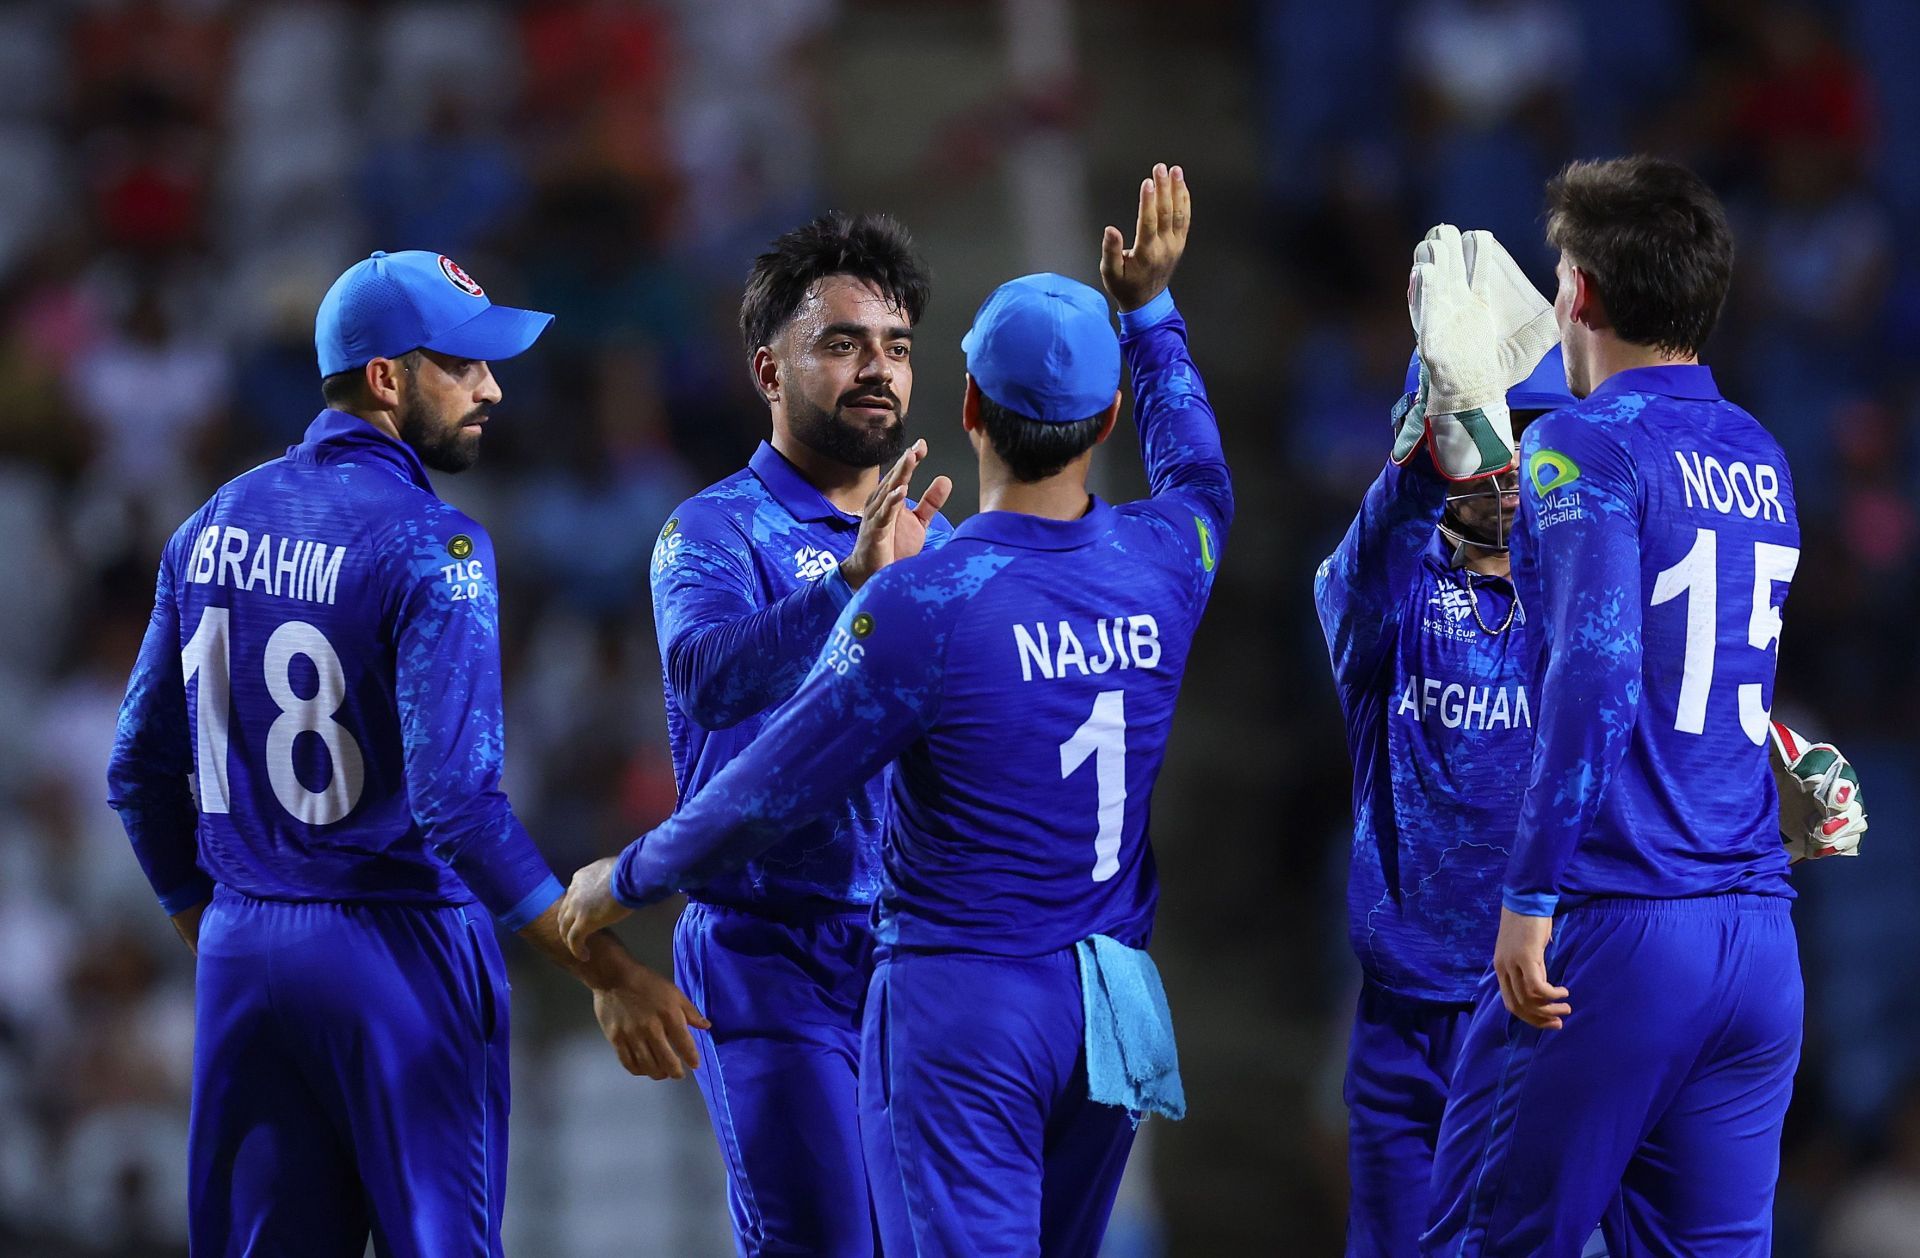 Who said what top 5 expert reactions to Afghanistan qualifying for